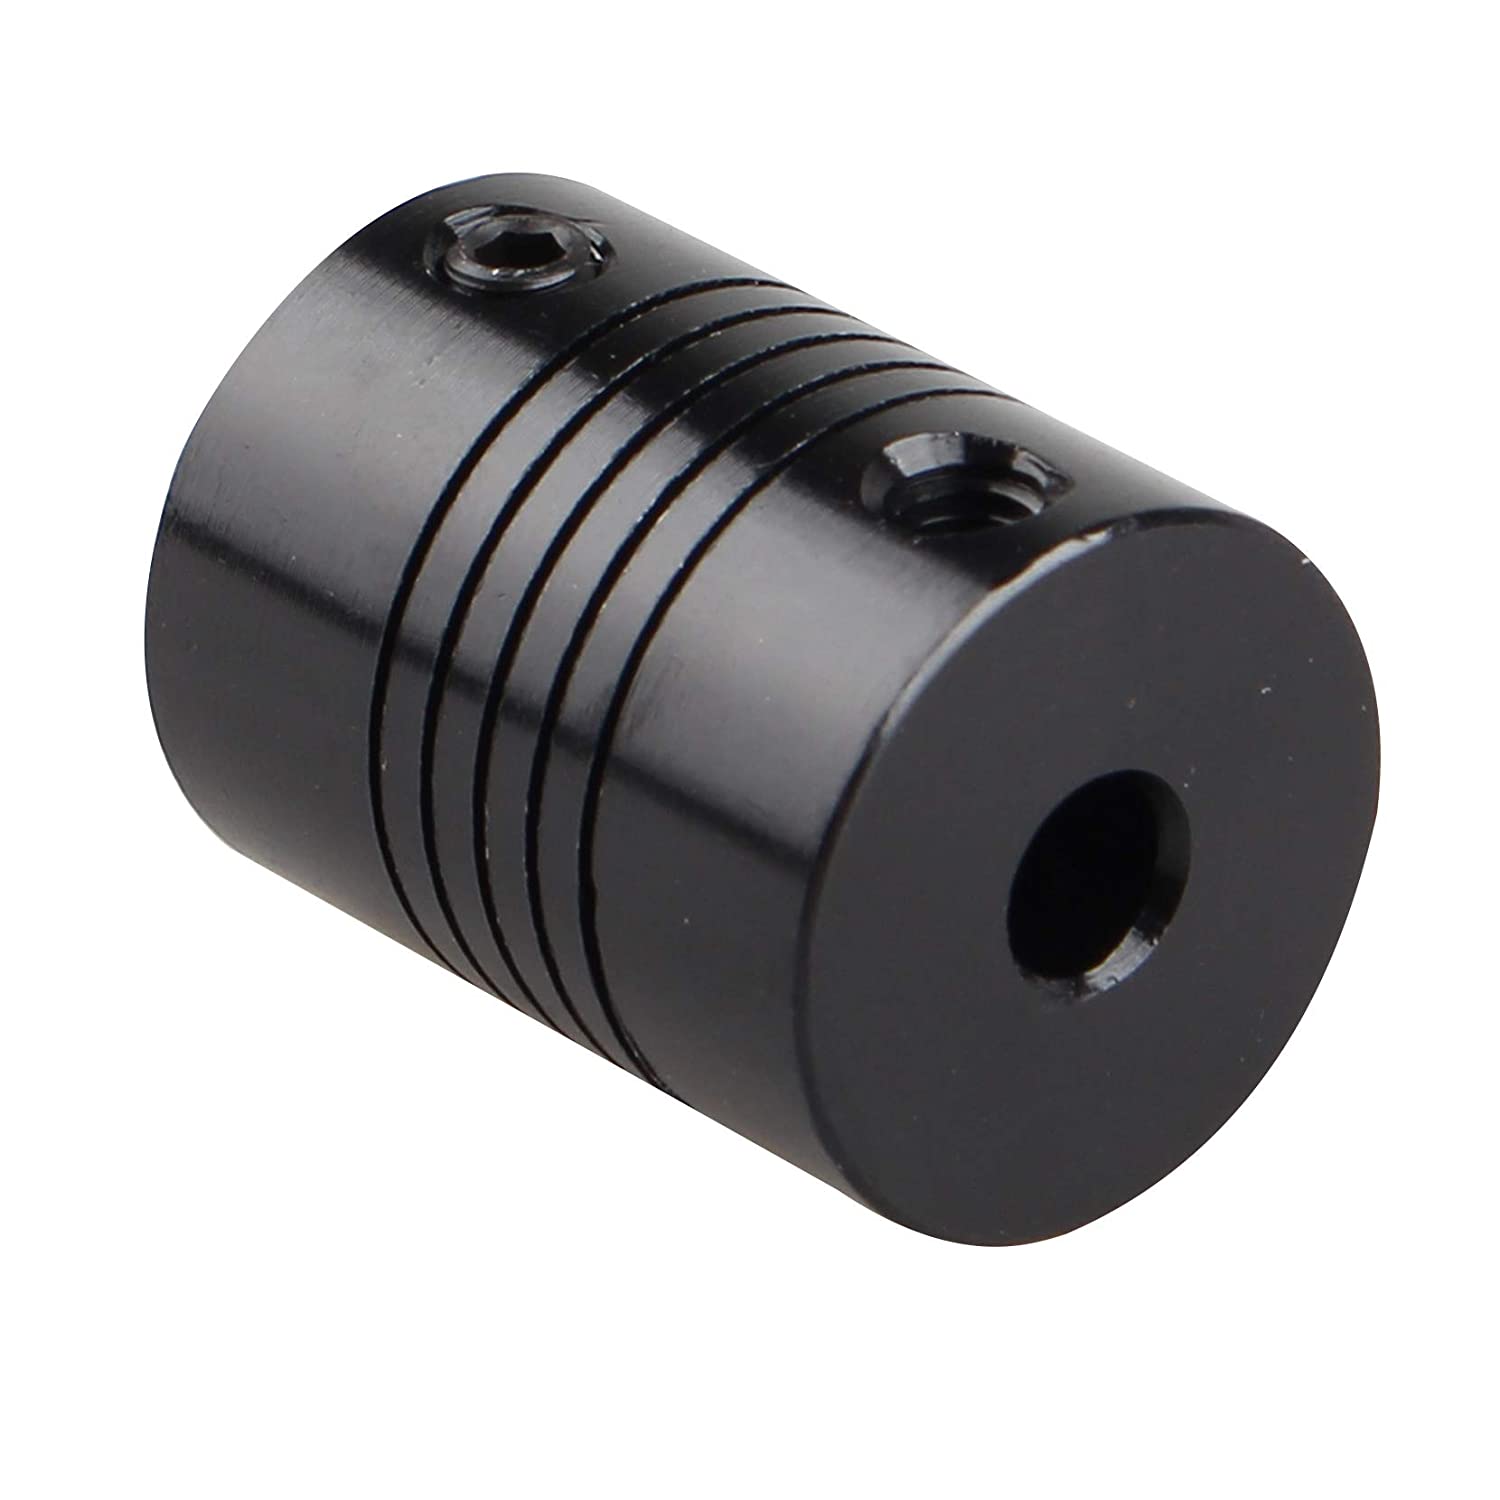 Pack of 4 Black Flexible Shaft Stepper Motor Couplers (Available in 5x5mm & 5x8mm)